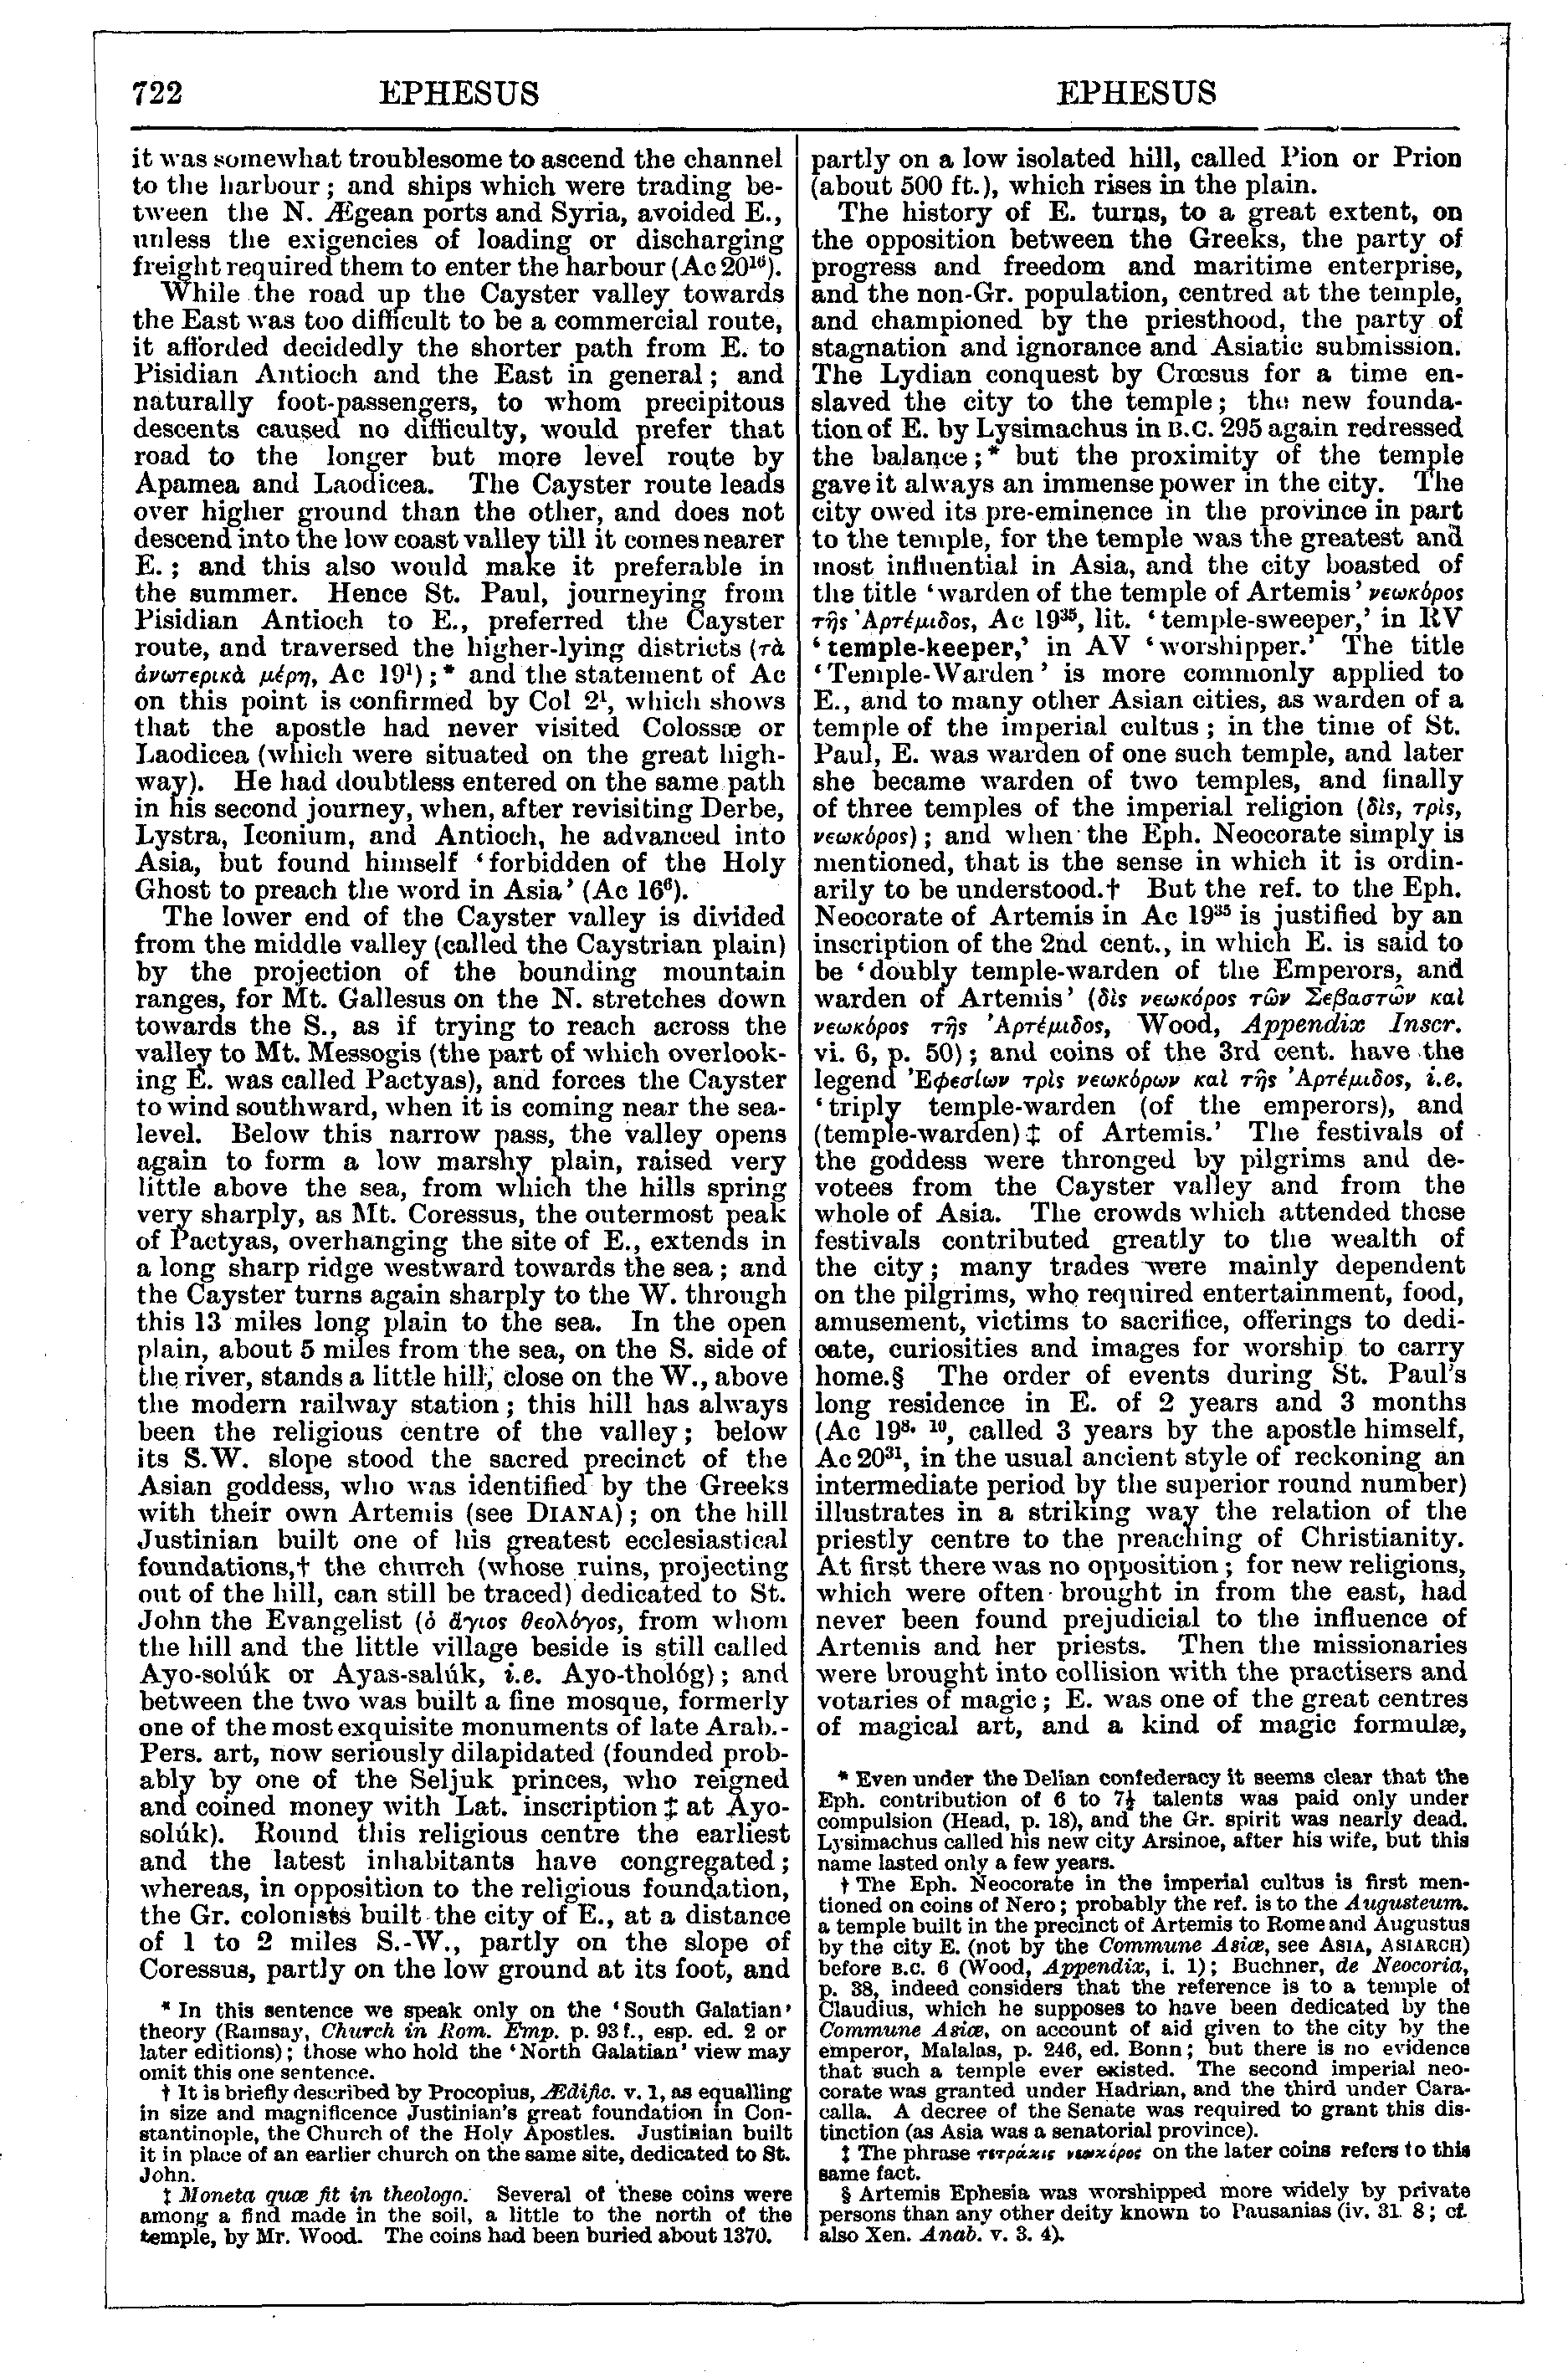 Image of page 722